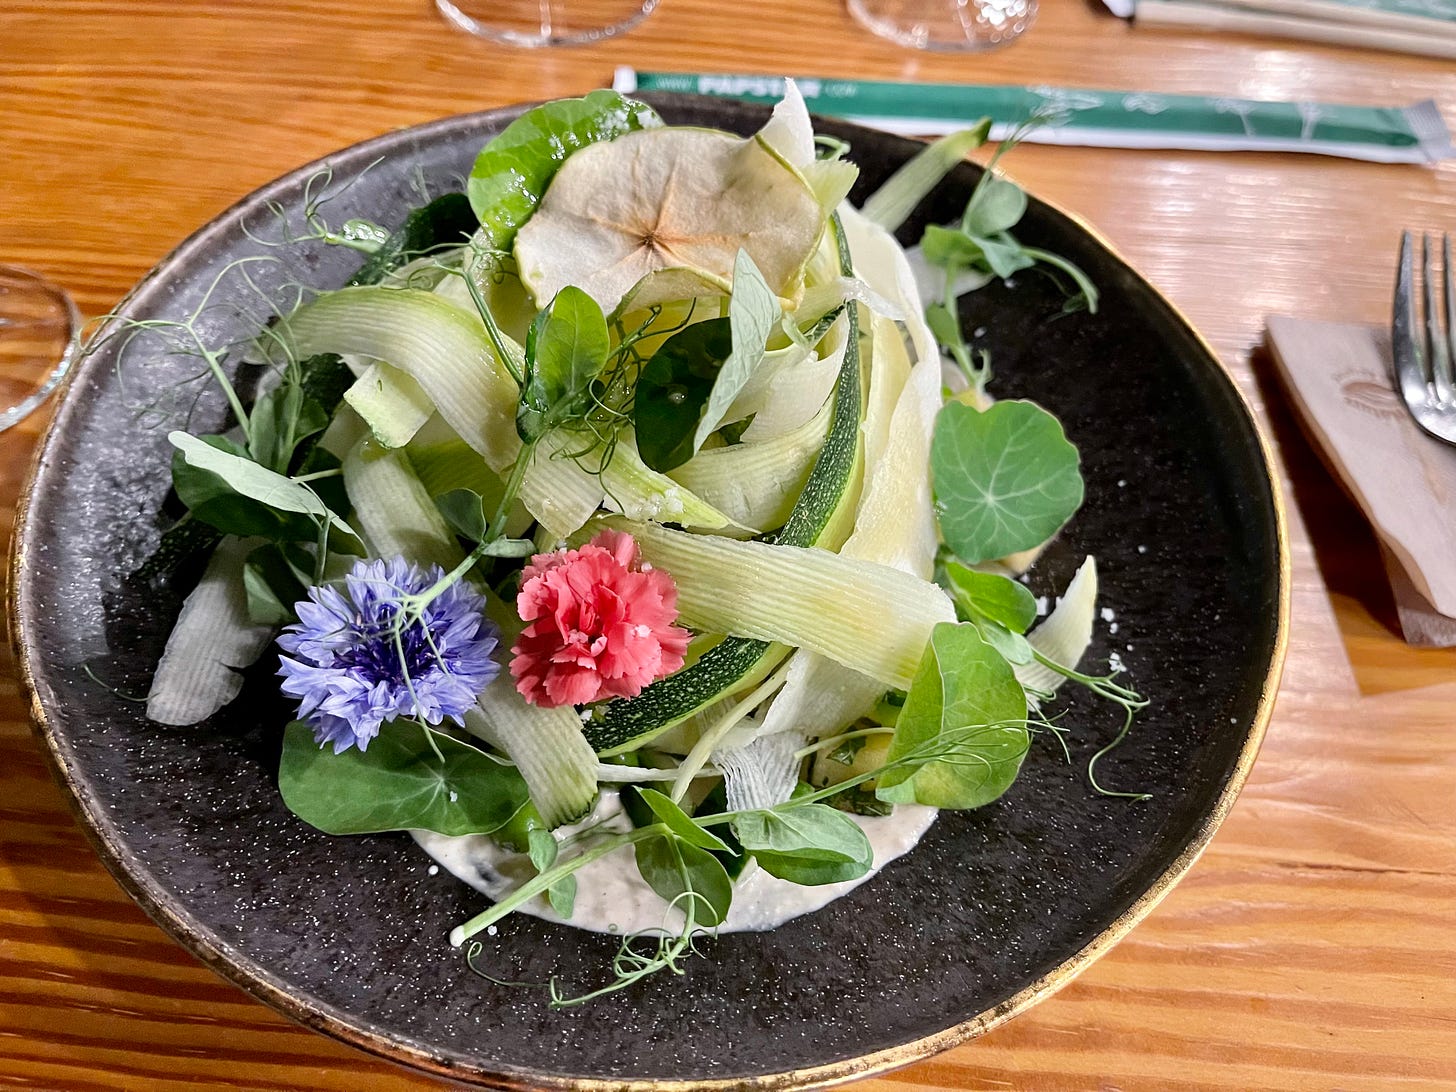 Salad with apple, zucchini and flower decorations on a black plate